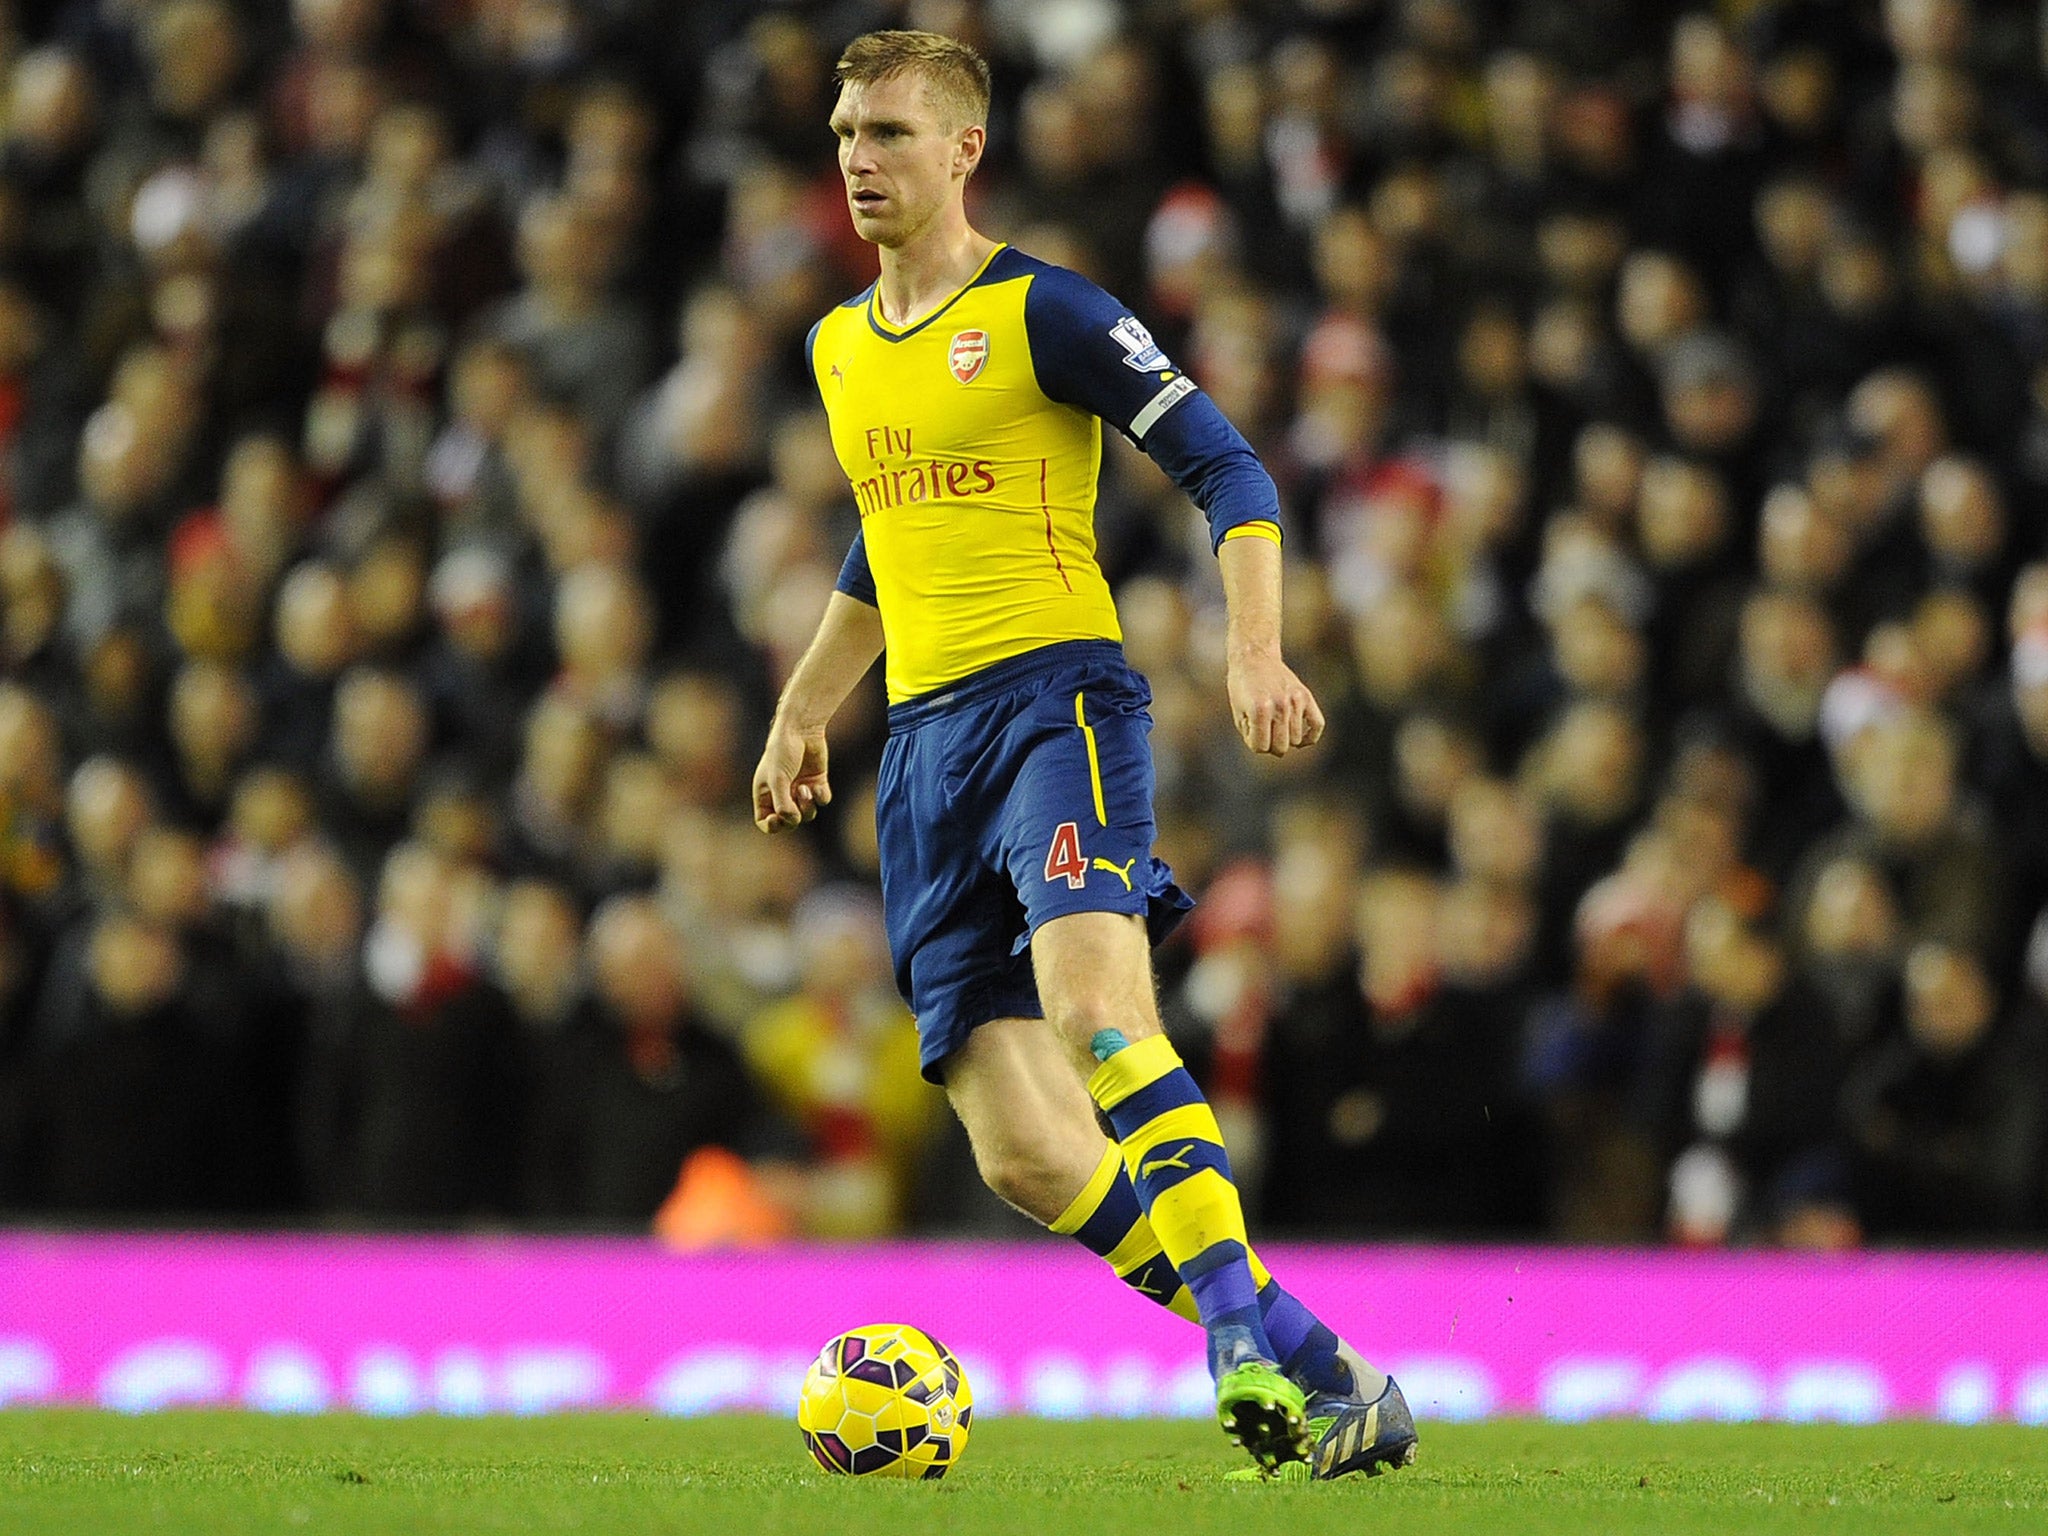 Per Mertesacker has suffered from having different central-defensive partners, according to his manager